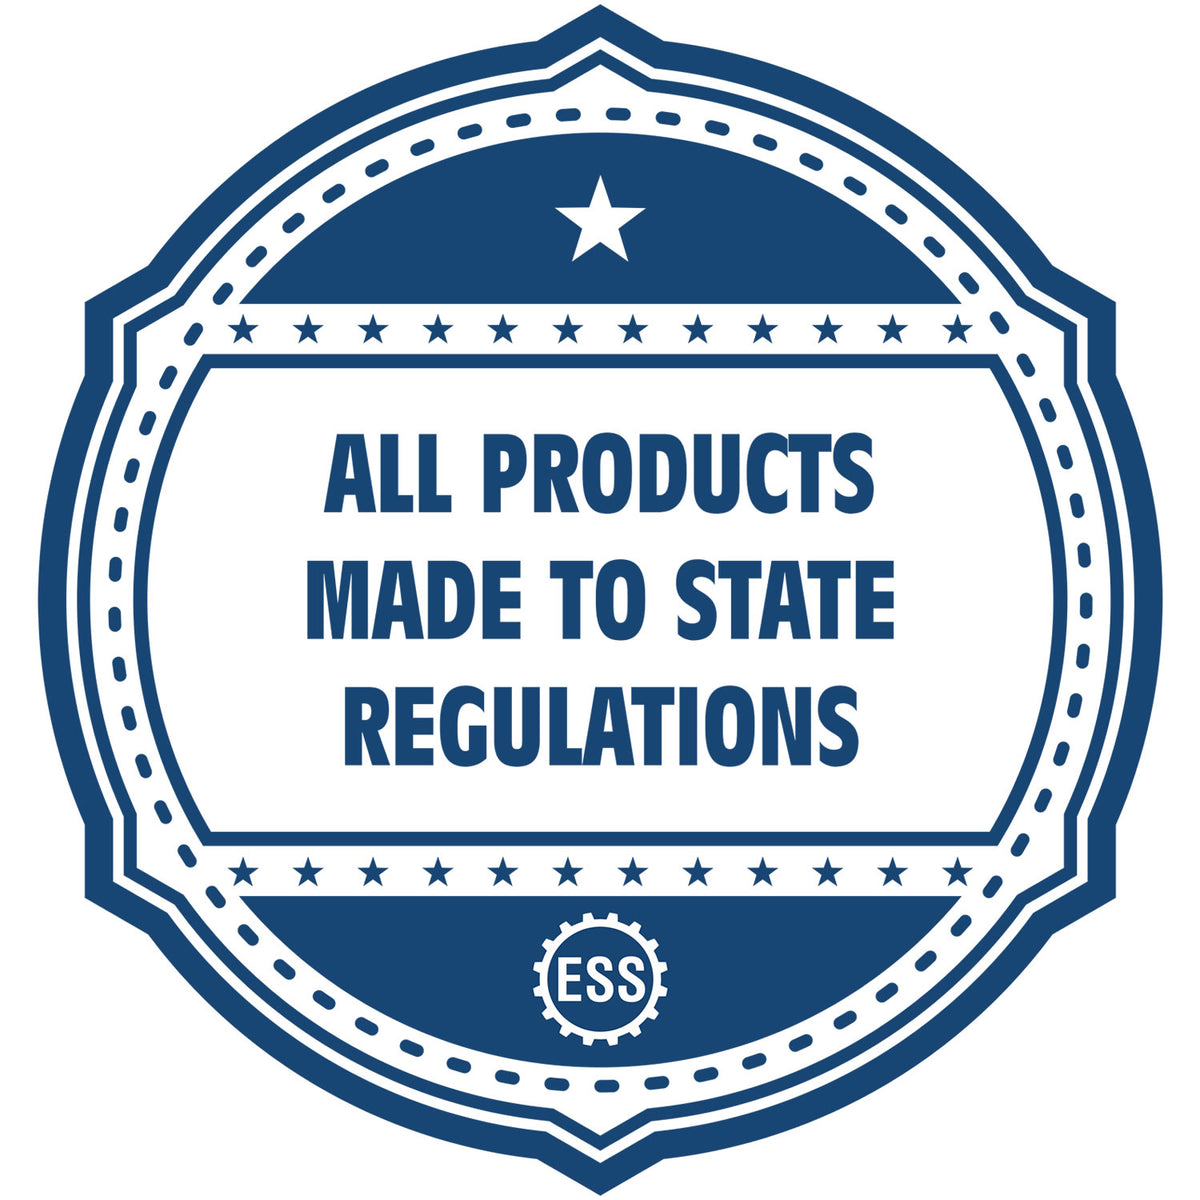 A blue icon or badge for the Gift South Dakota Architect Seal showing that this product is made in compliance with state regulations.